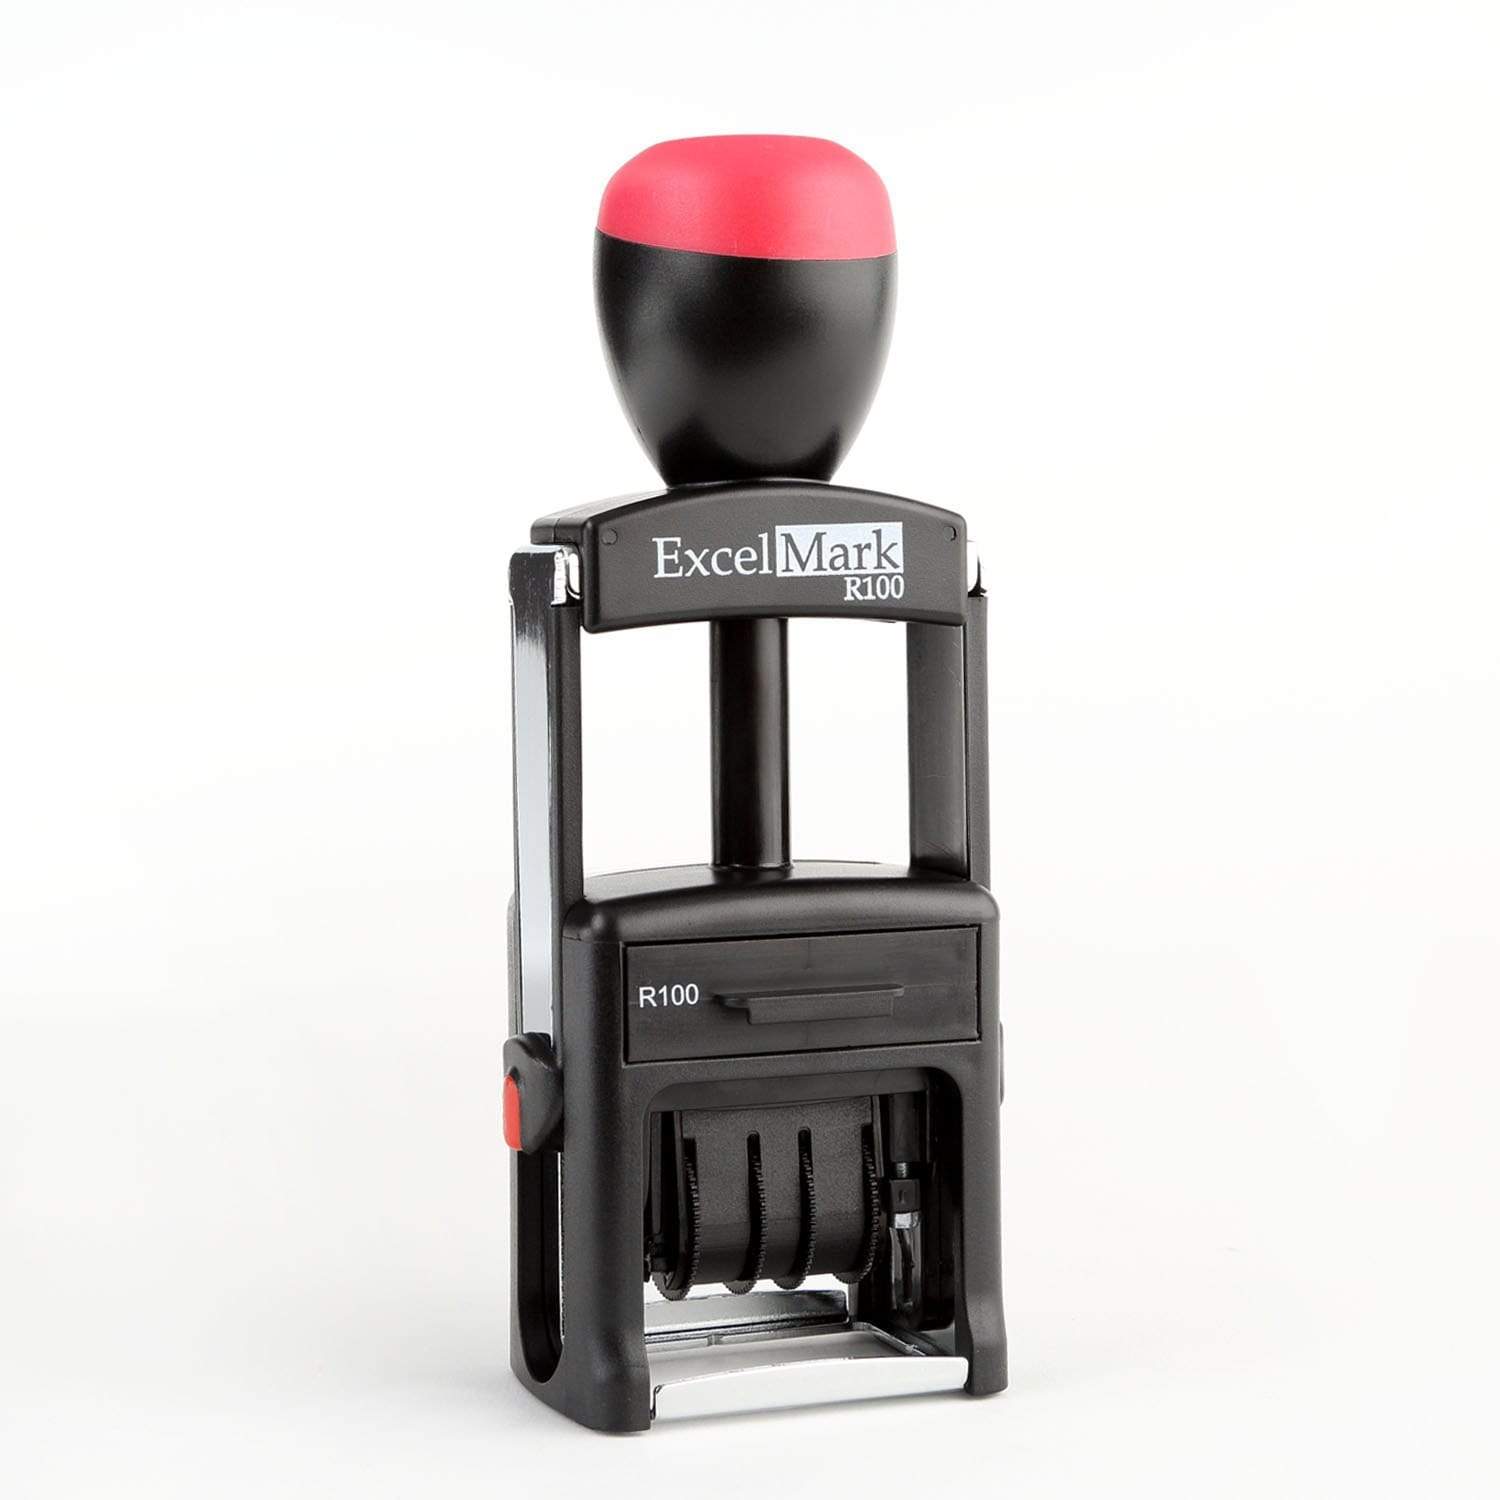 ExcelMark A-17 Self-Inking Stamp –